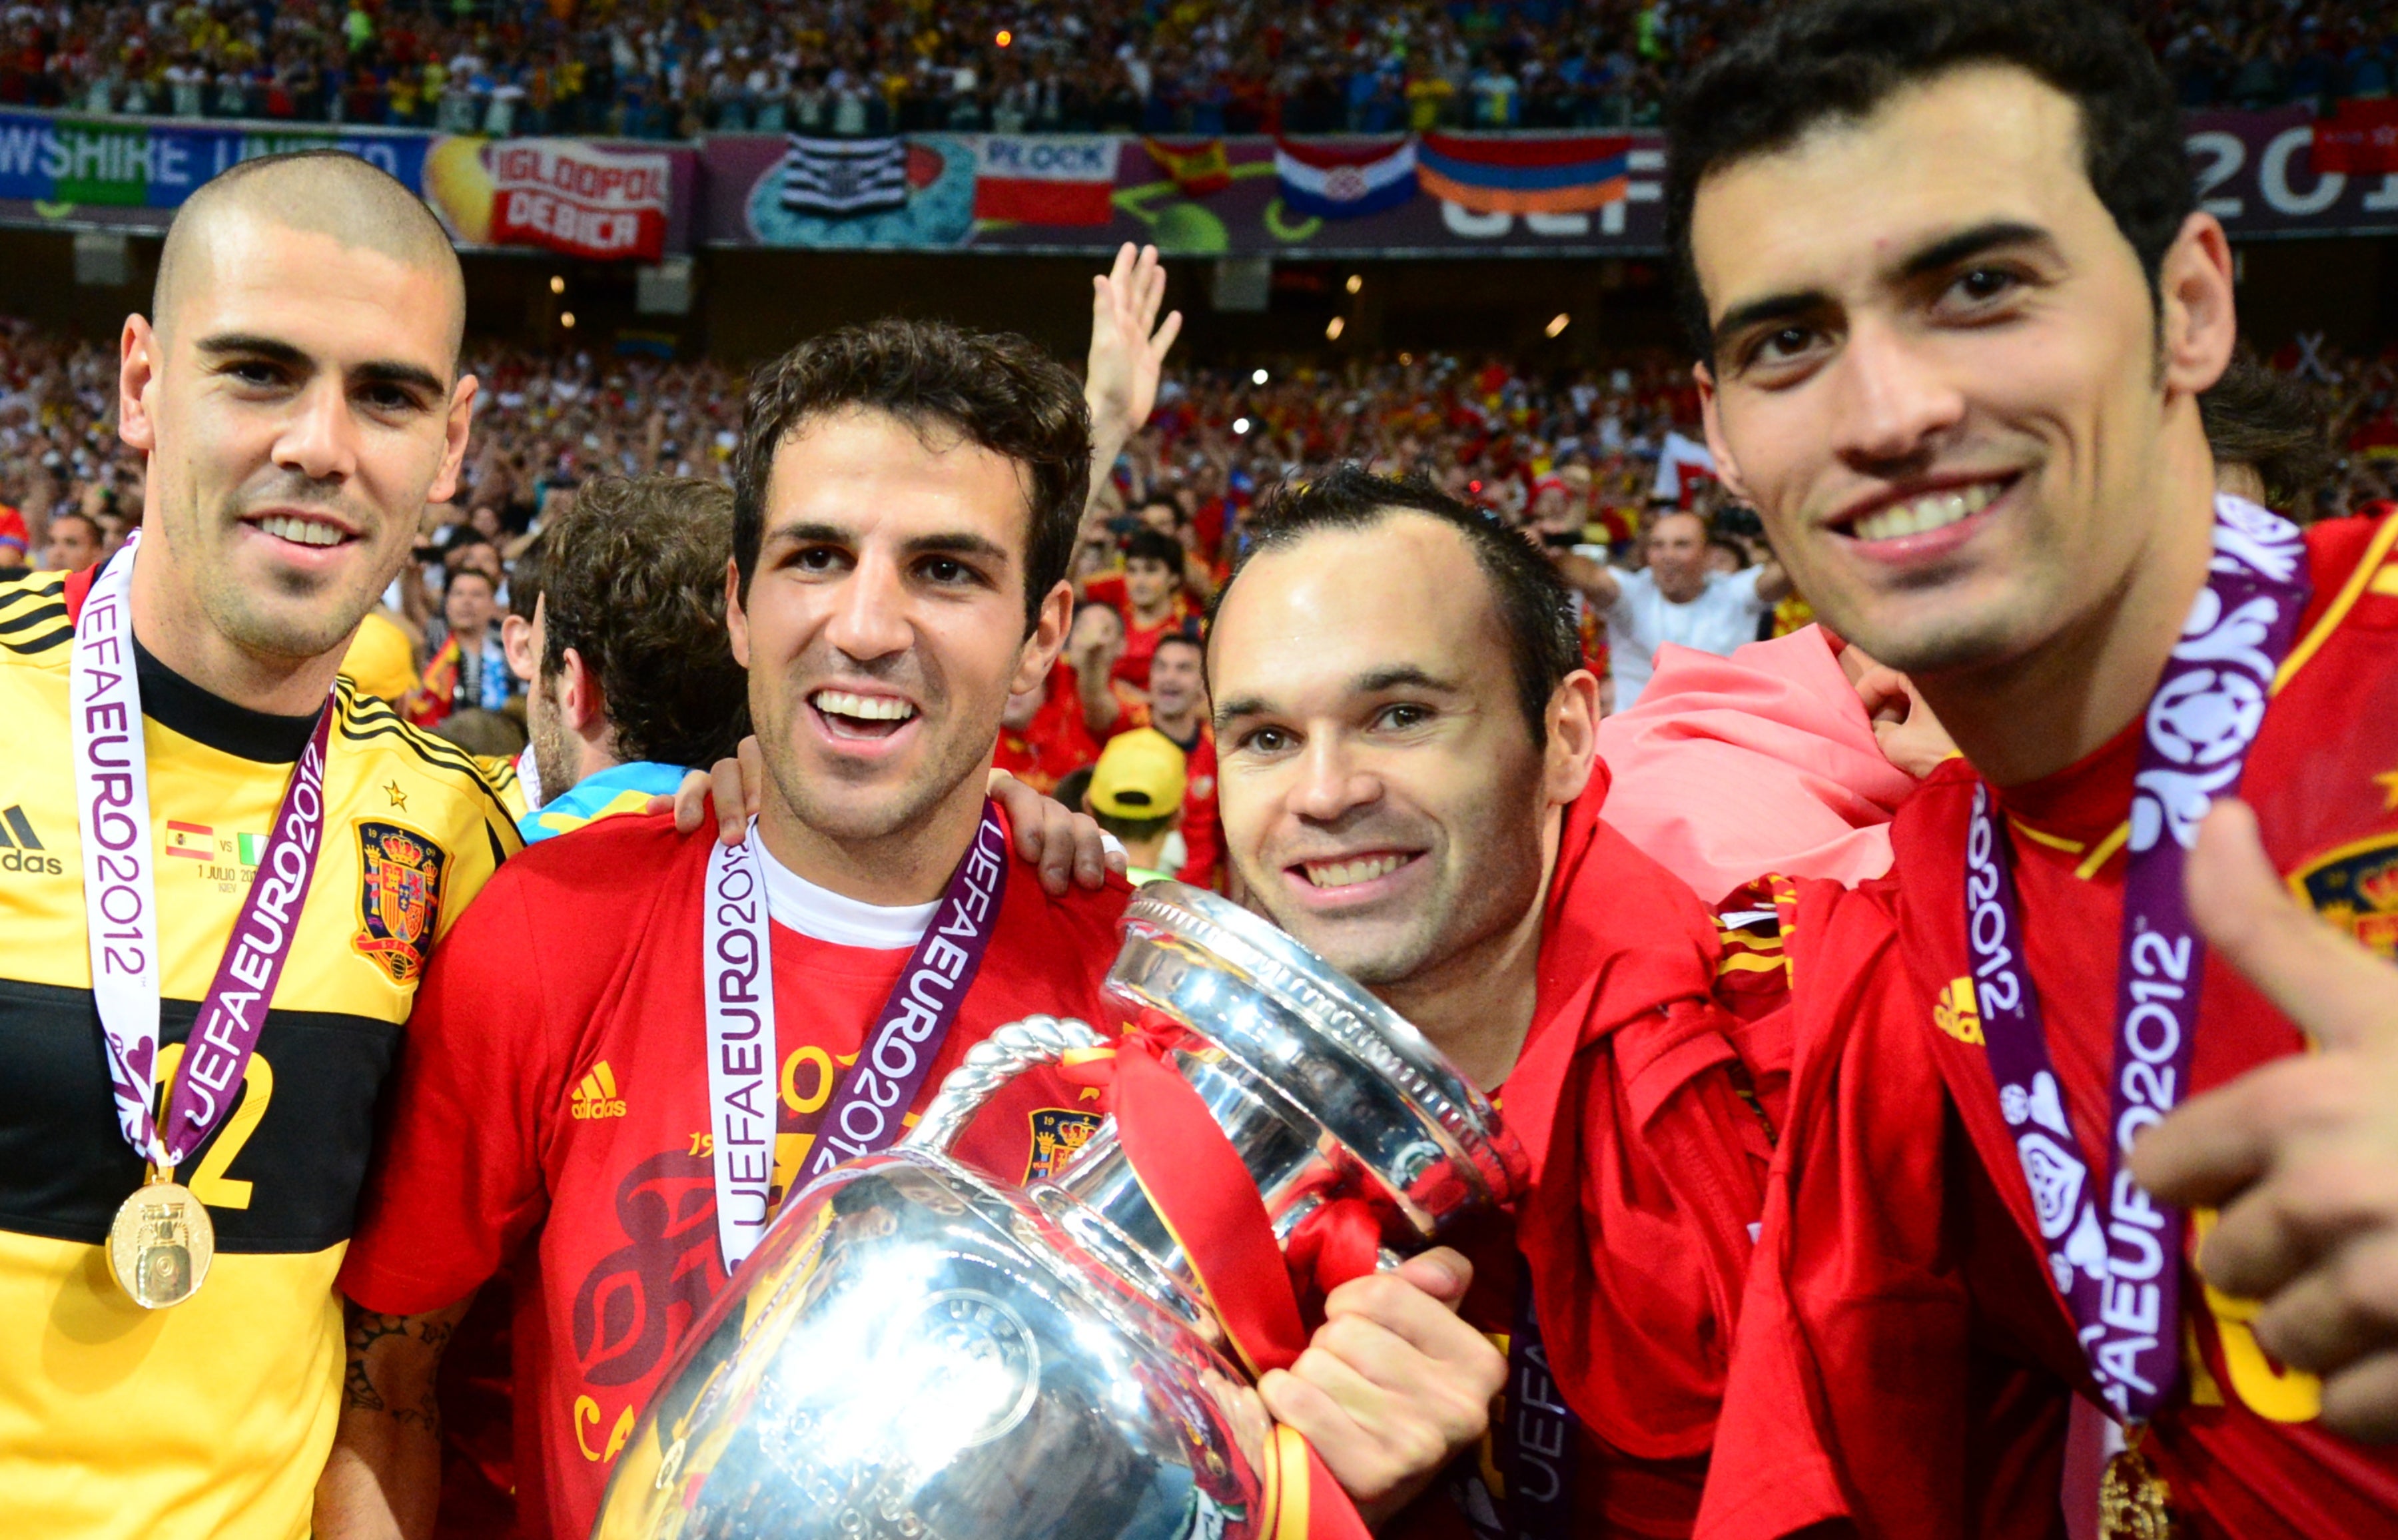 Iniesta was man of the match in the Euro 2012 final win against Italy